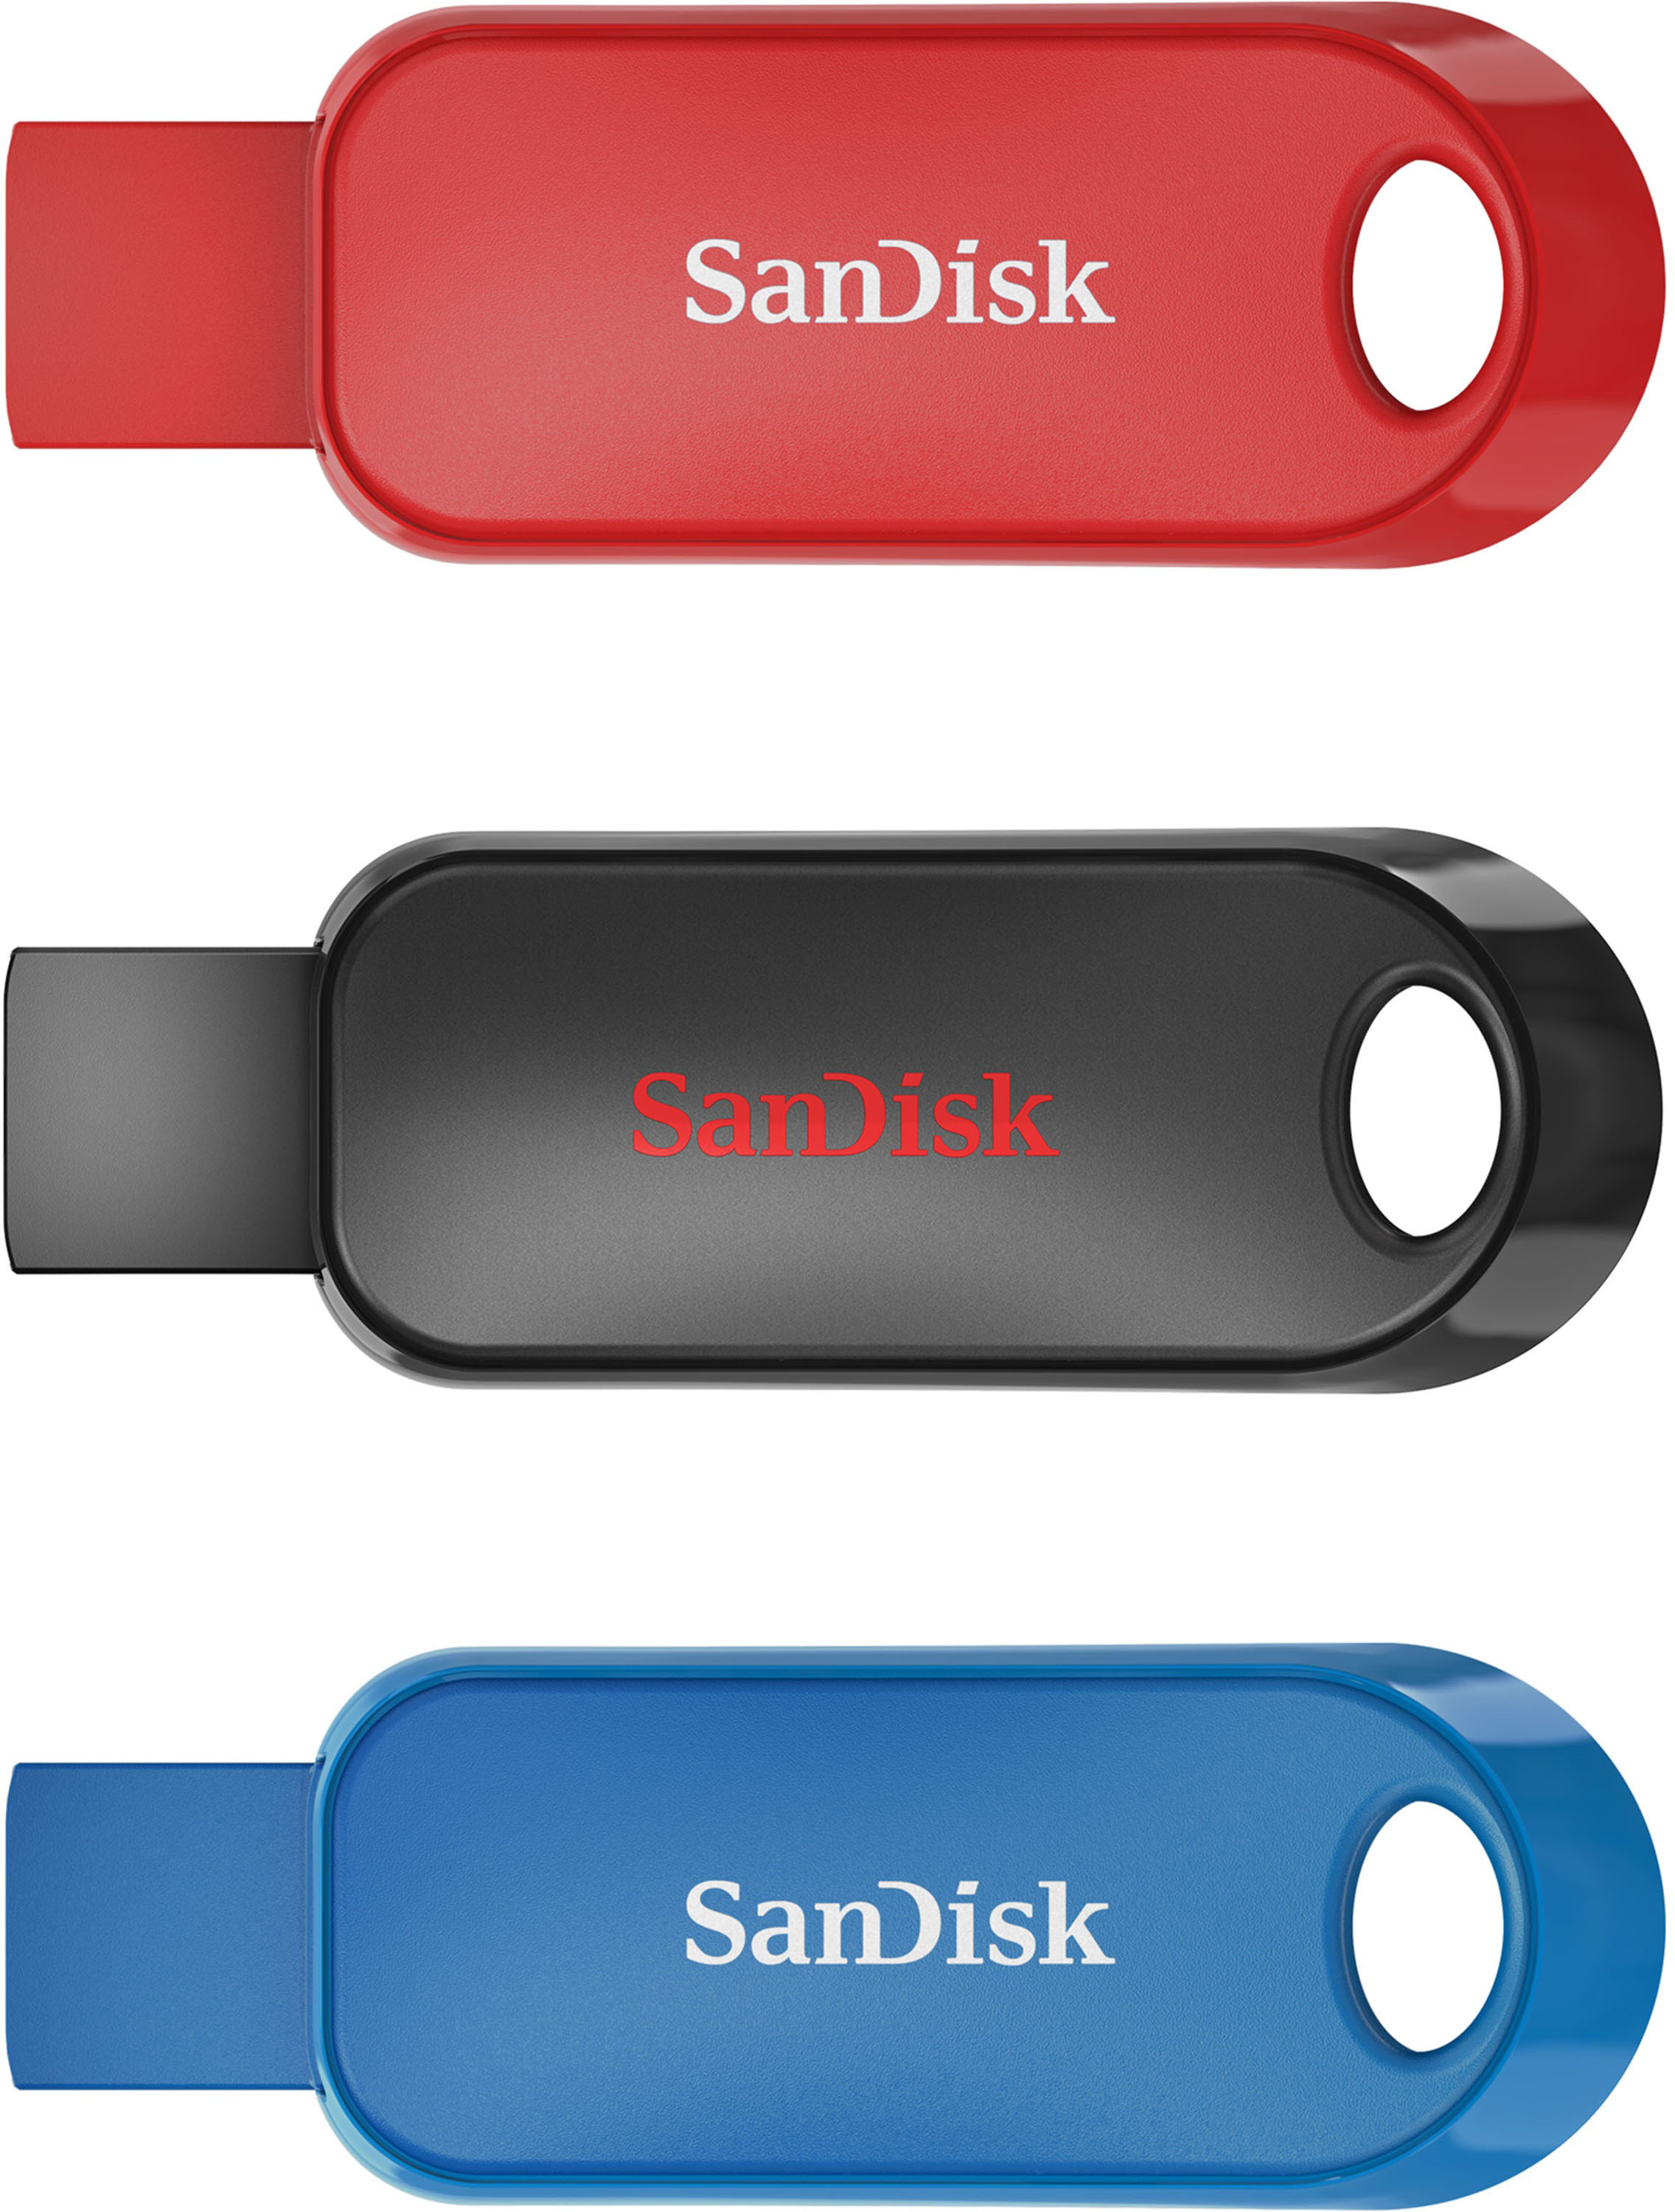 SanDisk Cruzer Snap 32GB USB 2.0 Type-A Flash Drive (3-Pack) Black, And Blue SDCZ62-032G-A46T - Best Buy